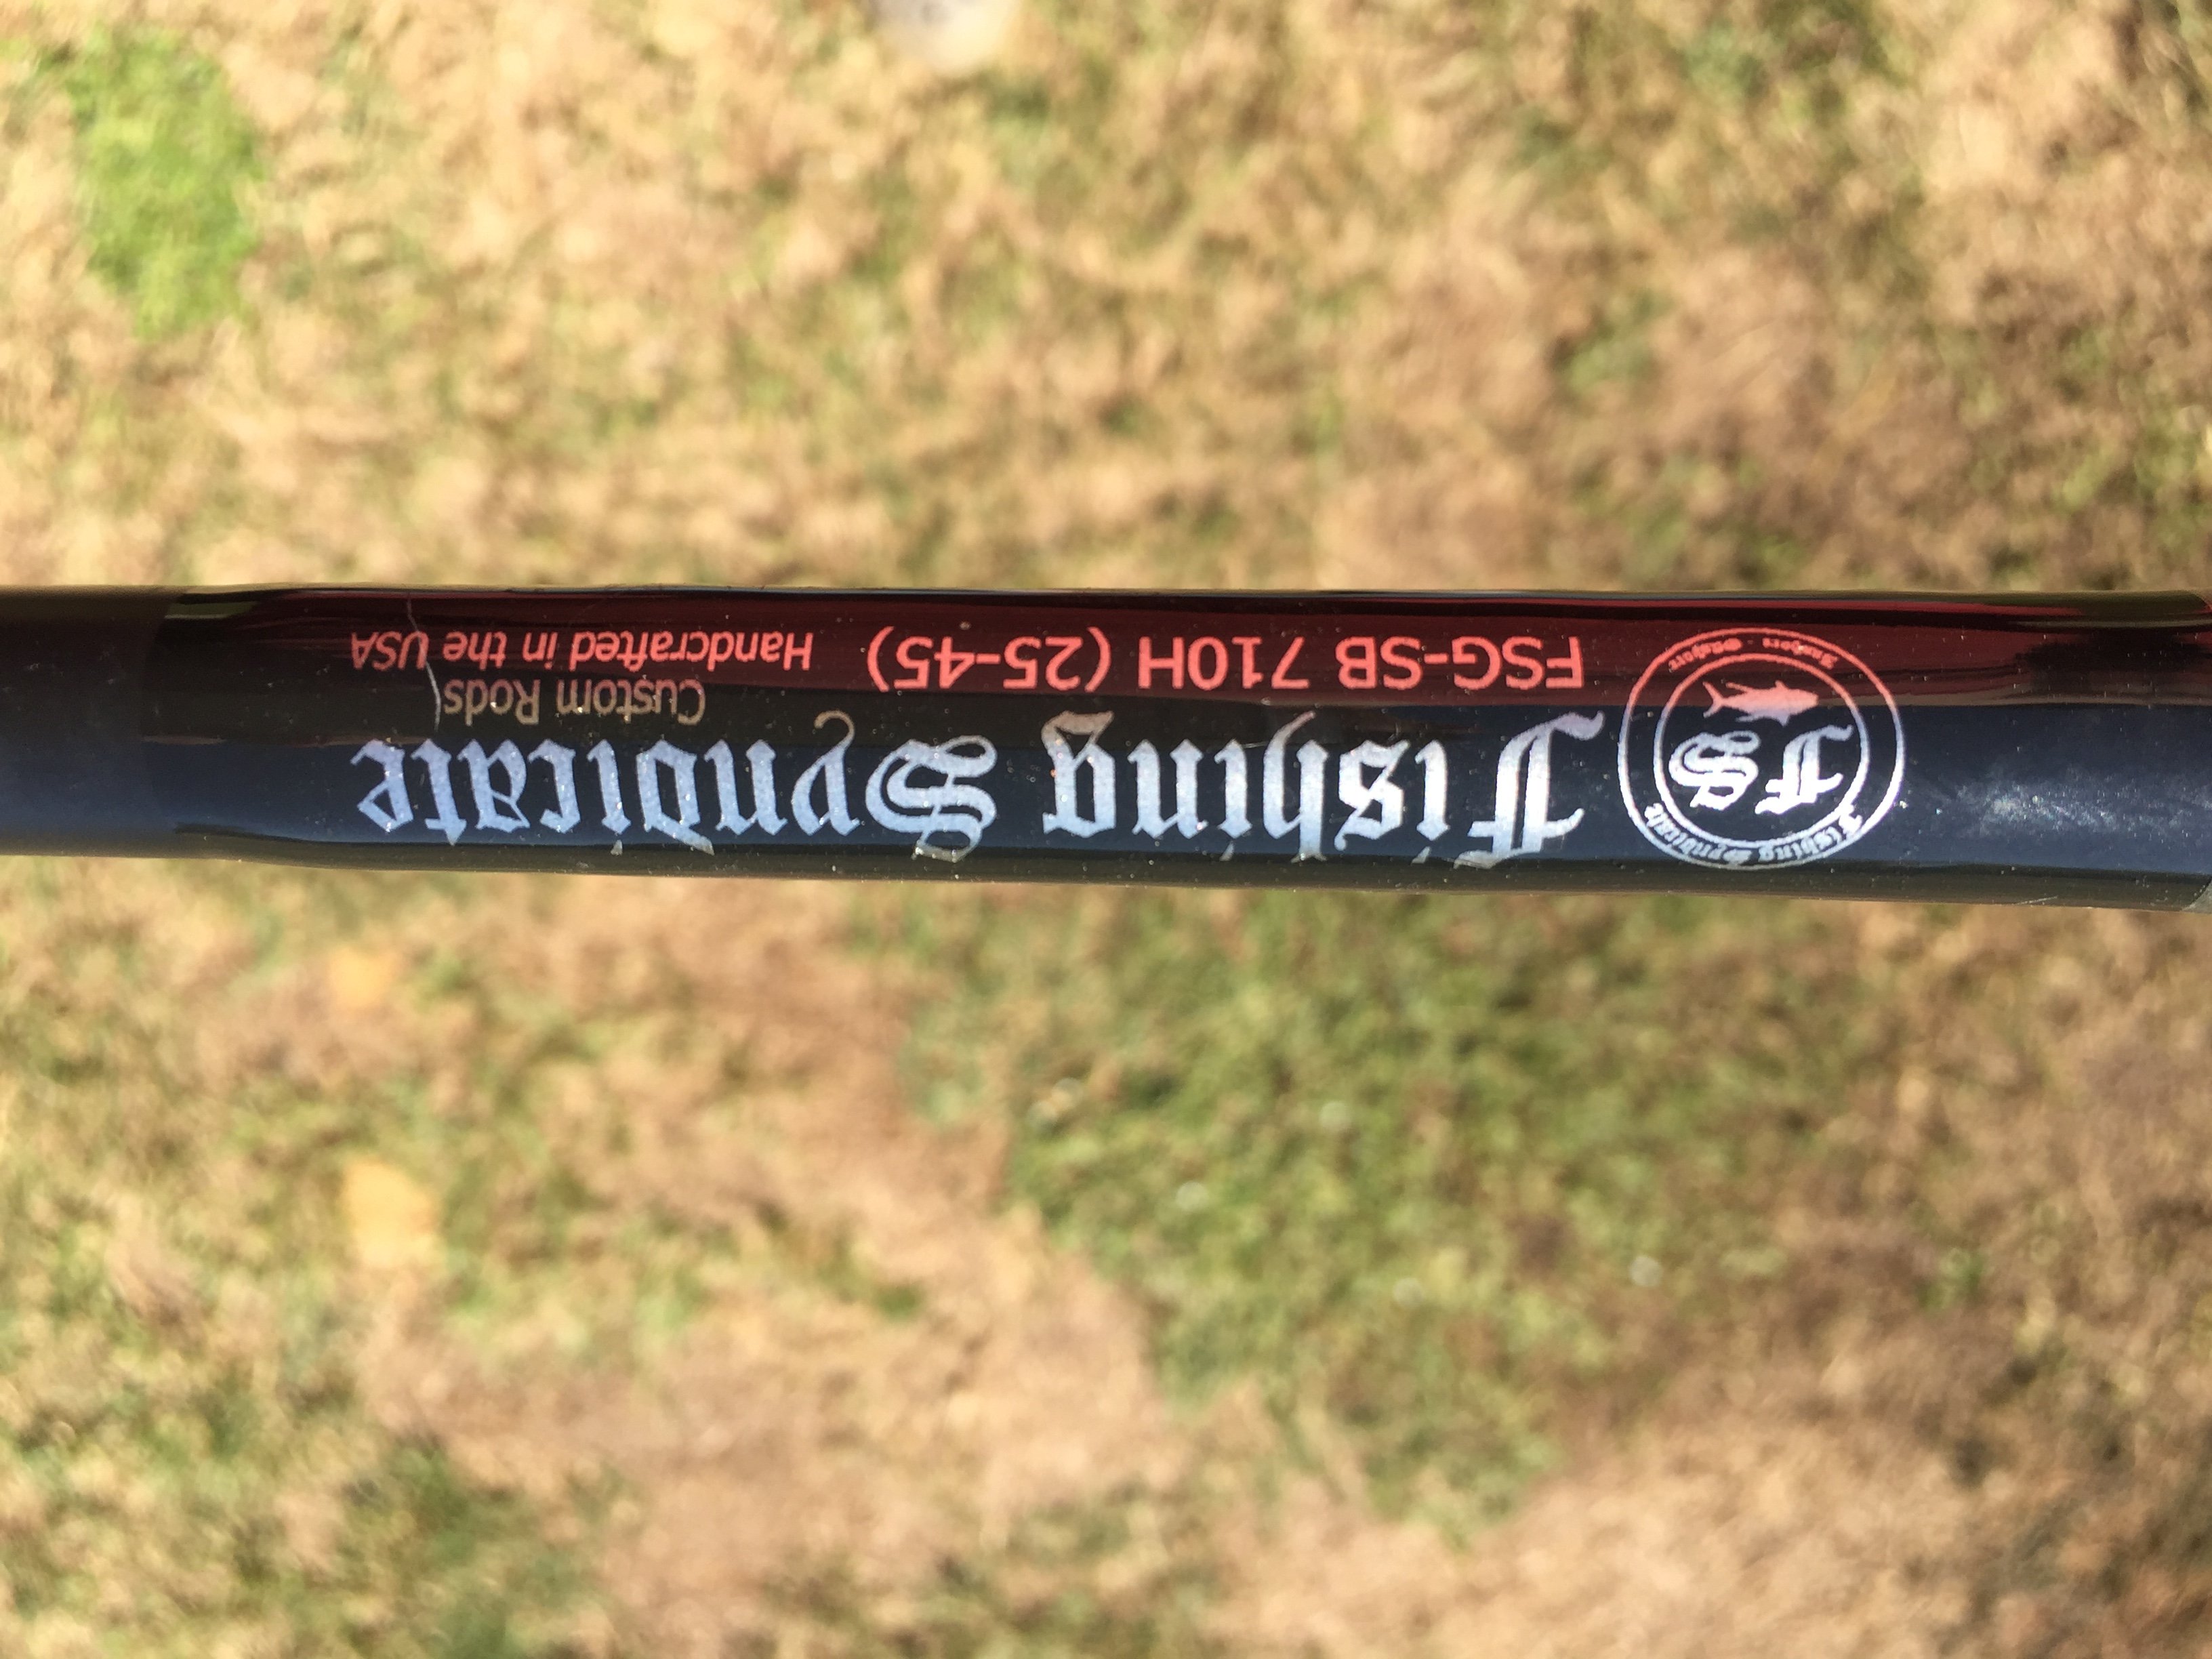 Dobyns Champion 908 ultra mag SB 9' great condition will sell for cheap. Fishing  syndicate rod Xh 7'10” never used awesome custom hinkle trout rod strong  heavy duty guides -$250 OBO! 